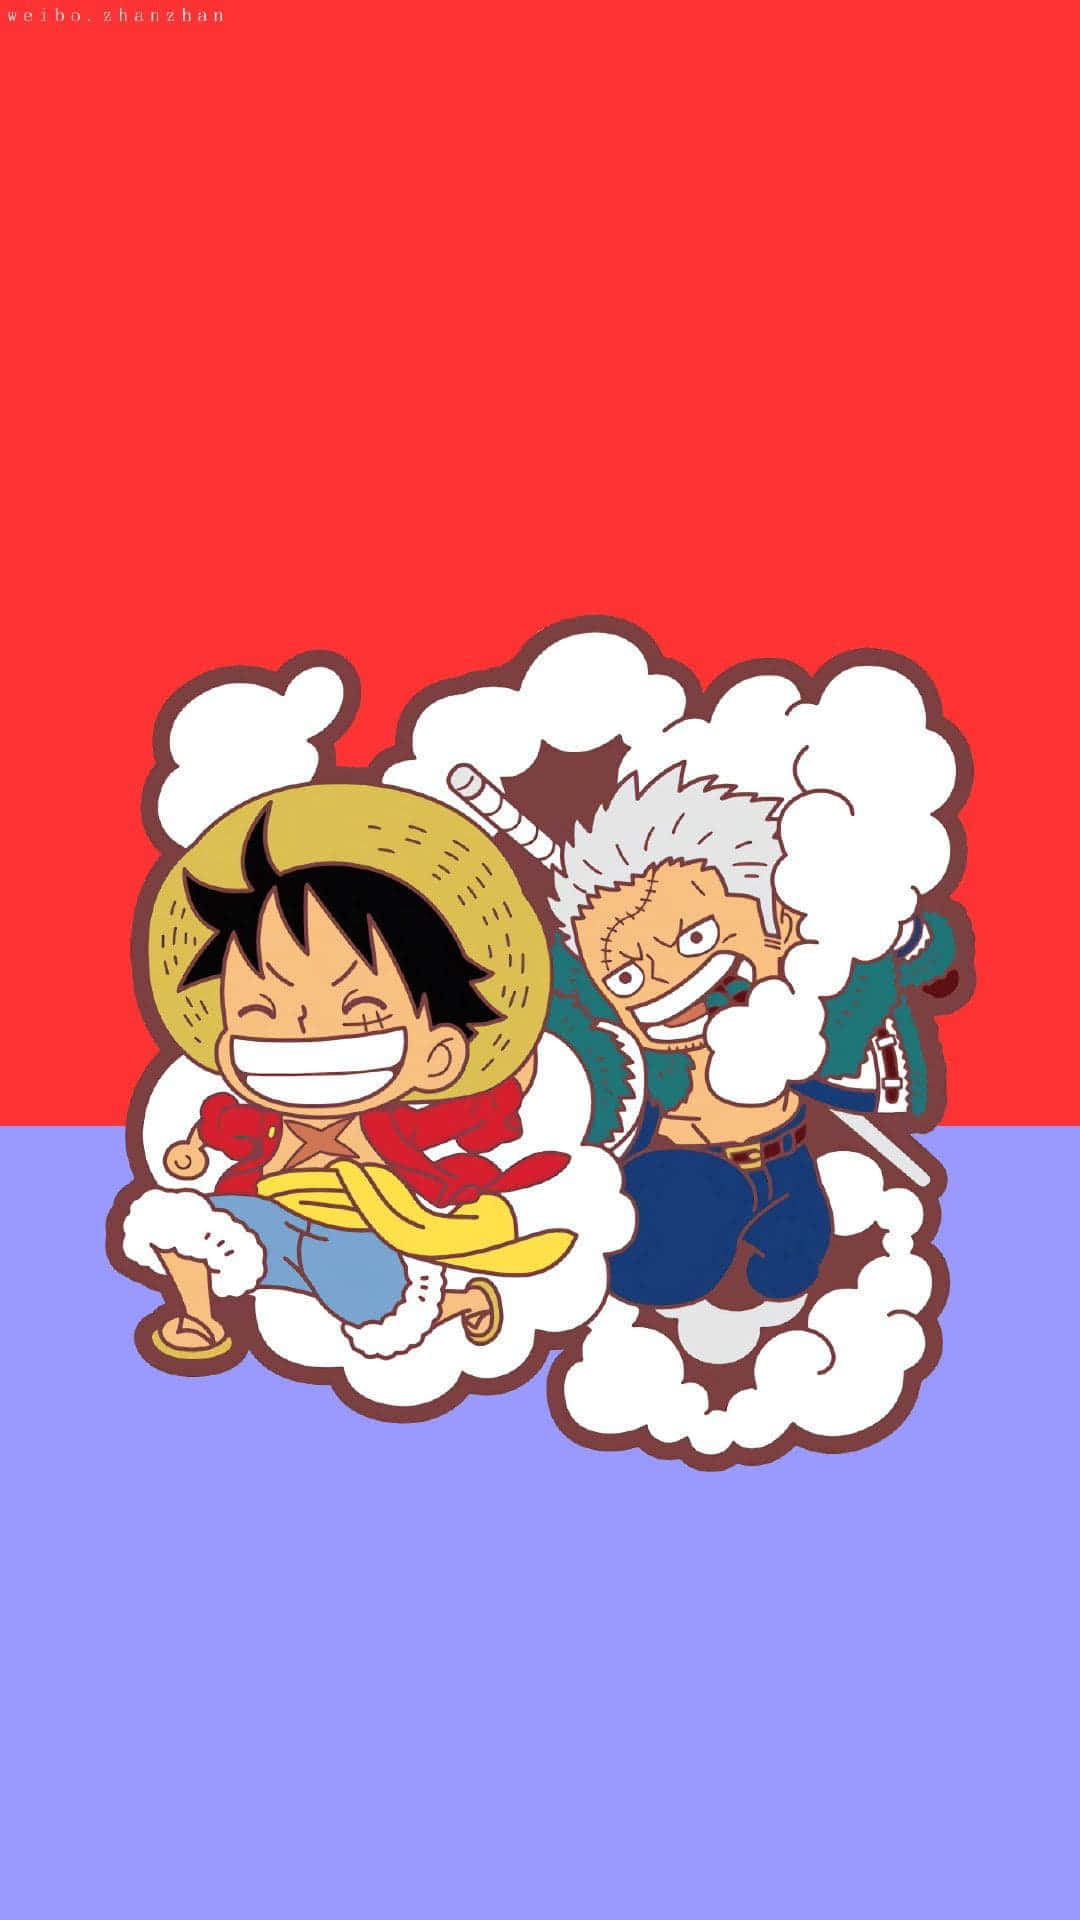 Luffy ready to set sail with the Strawhats